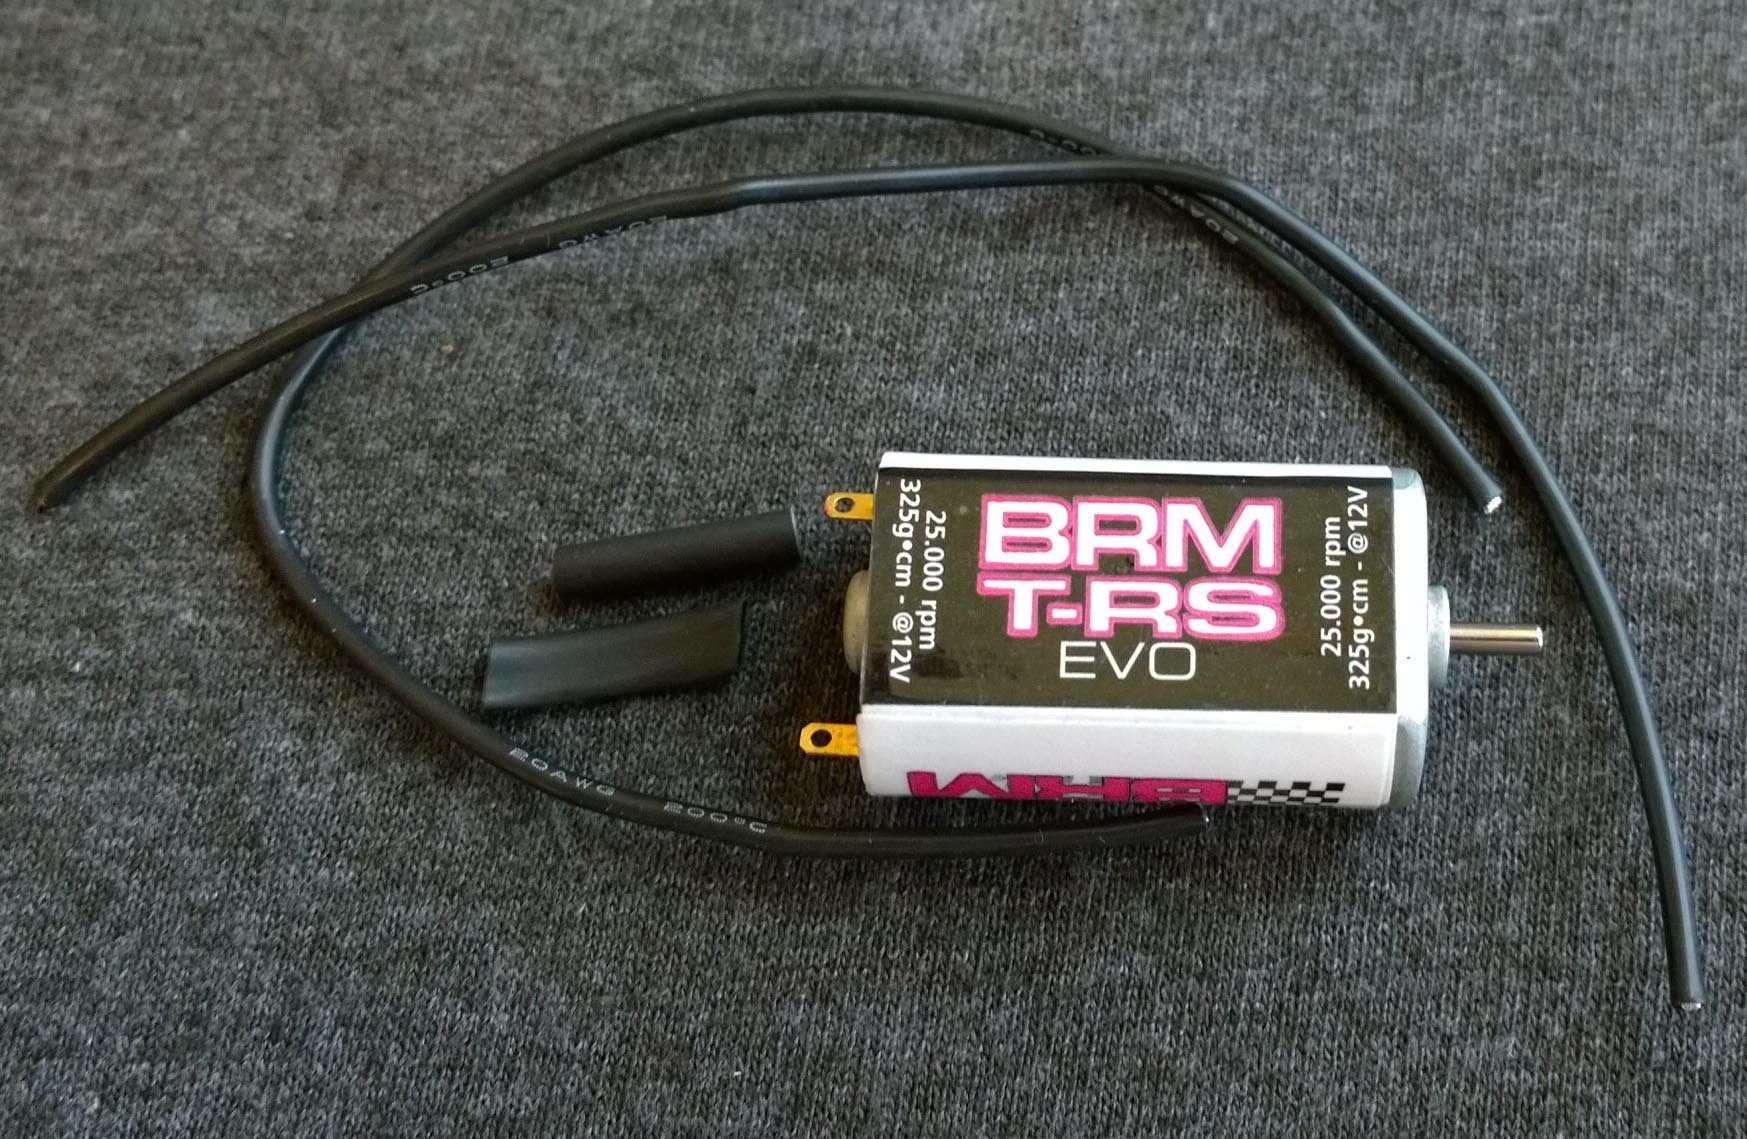 S-033S 'Black Can' T-RS EVO Motor w/new type cables